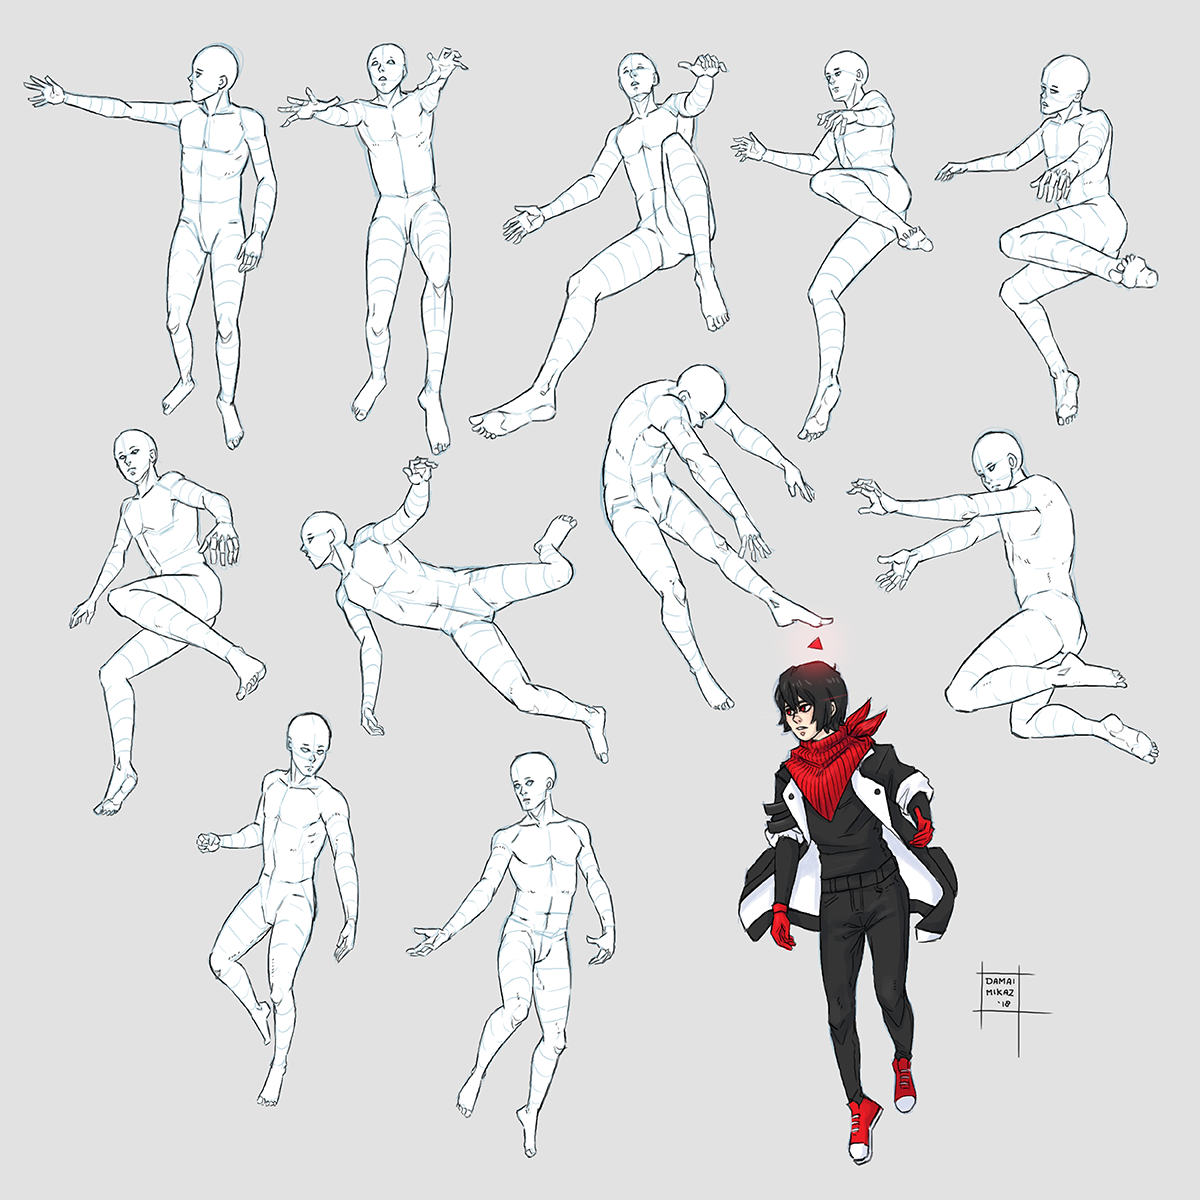 Sketchdump October 2018 [Flying and falling poses] by DamaiMikaz on ...